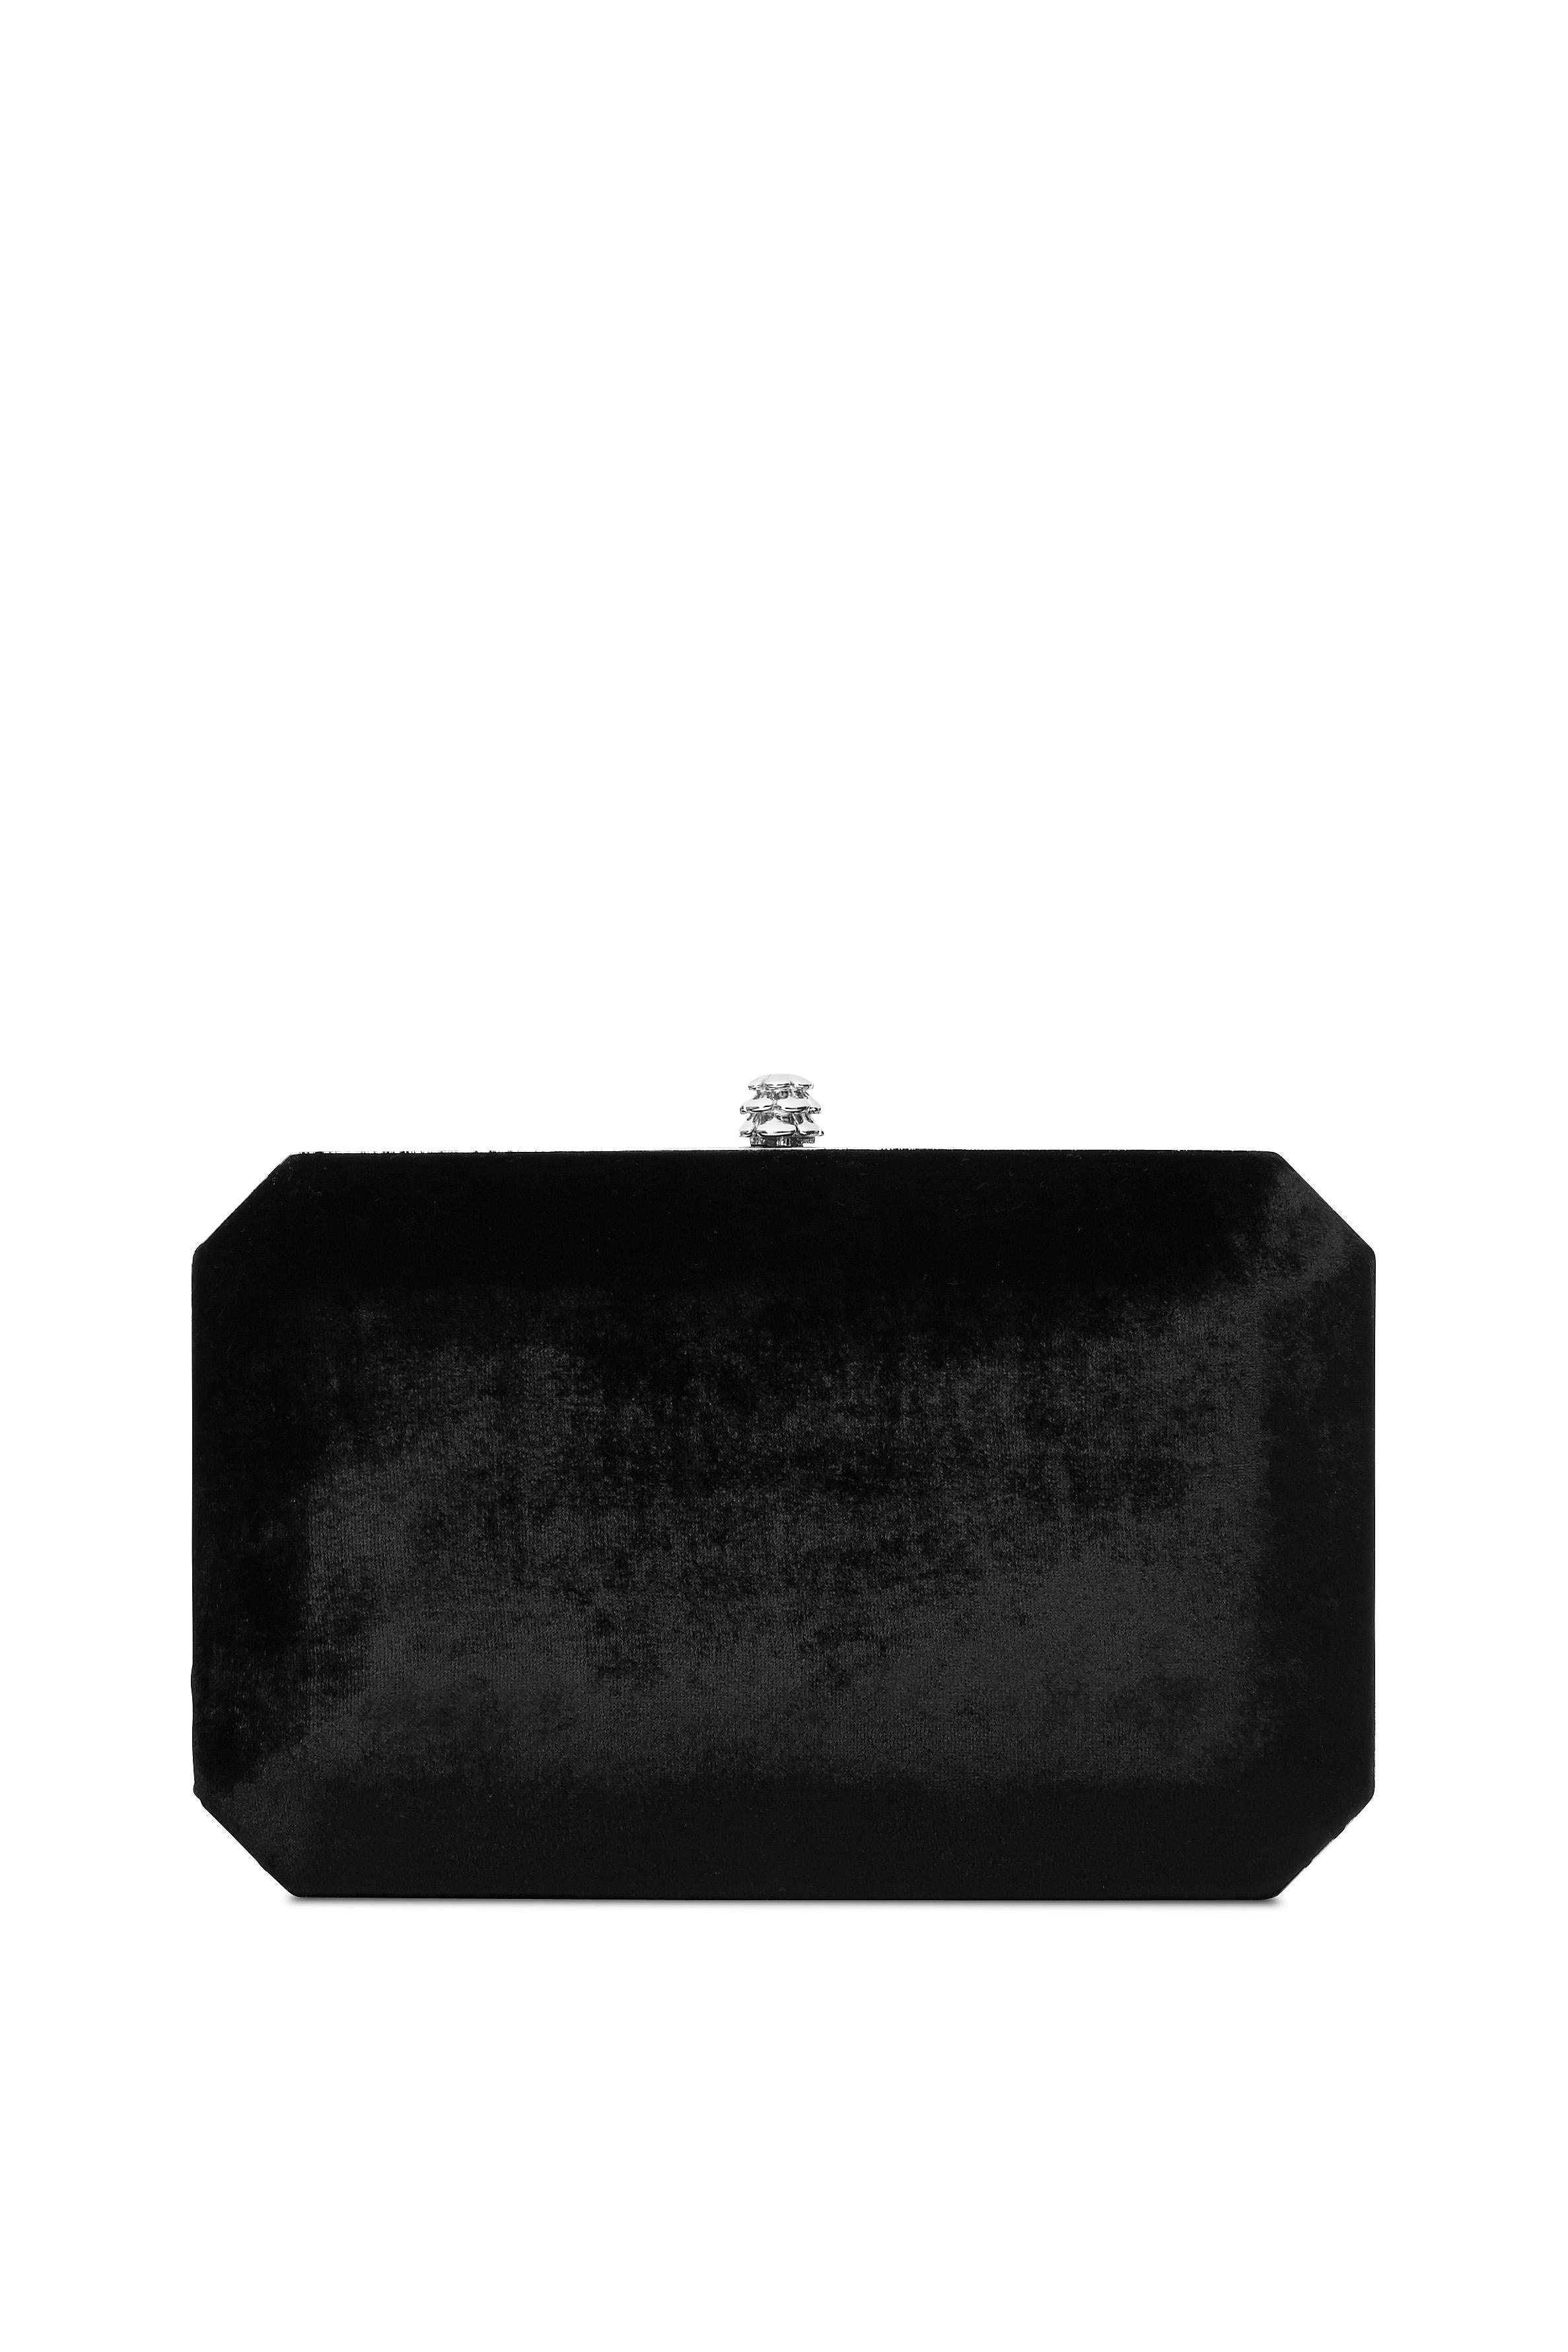 The Lily is featured in our Black Onyx crushed velvet with silver hardware. It is a hard-framed rectangular clutch designed with interior pockets and an optional silver cross-body chain. It fits the large iPhone and features our signature Pinecone